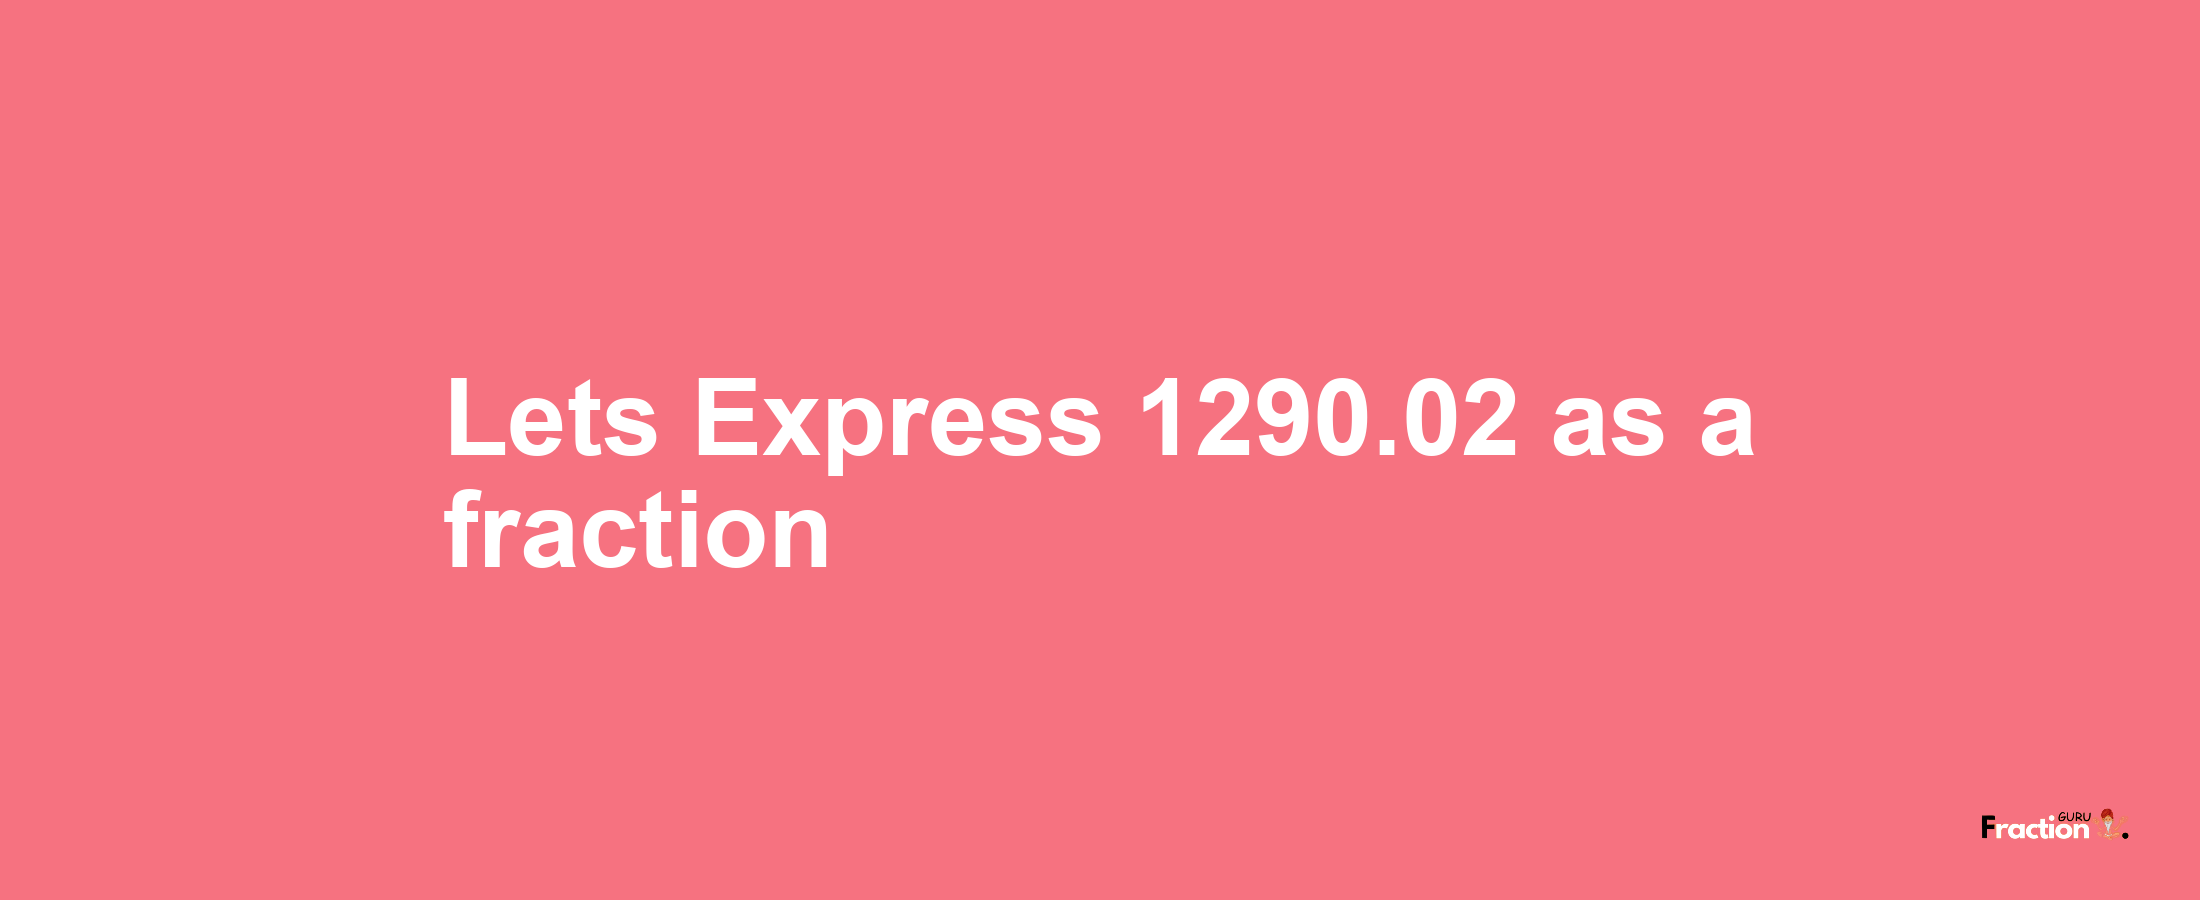 Lets Express 1290.02 as afraction